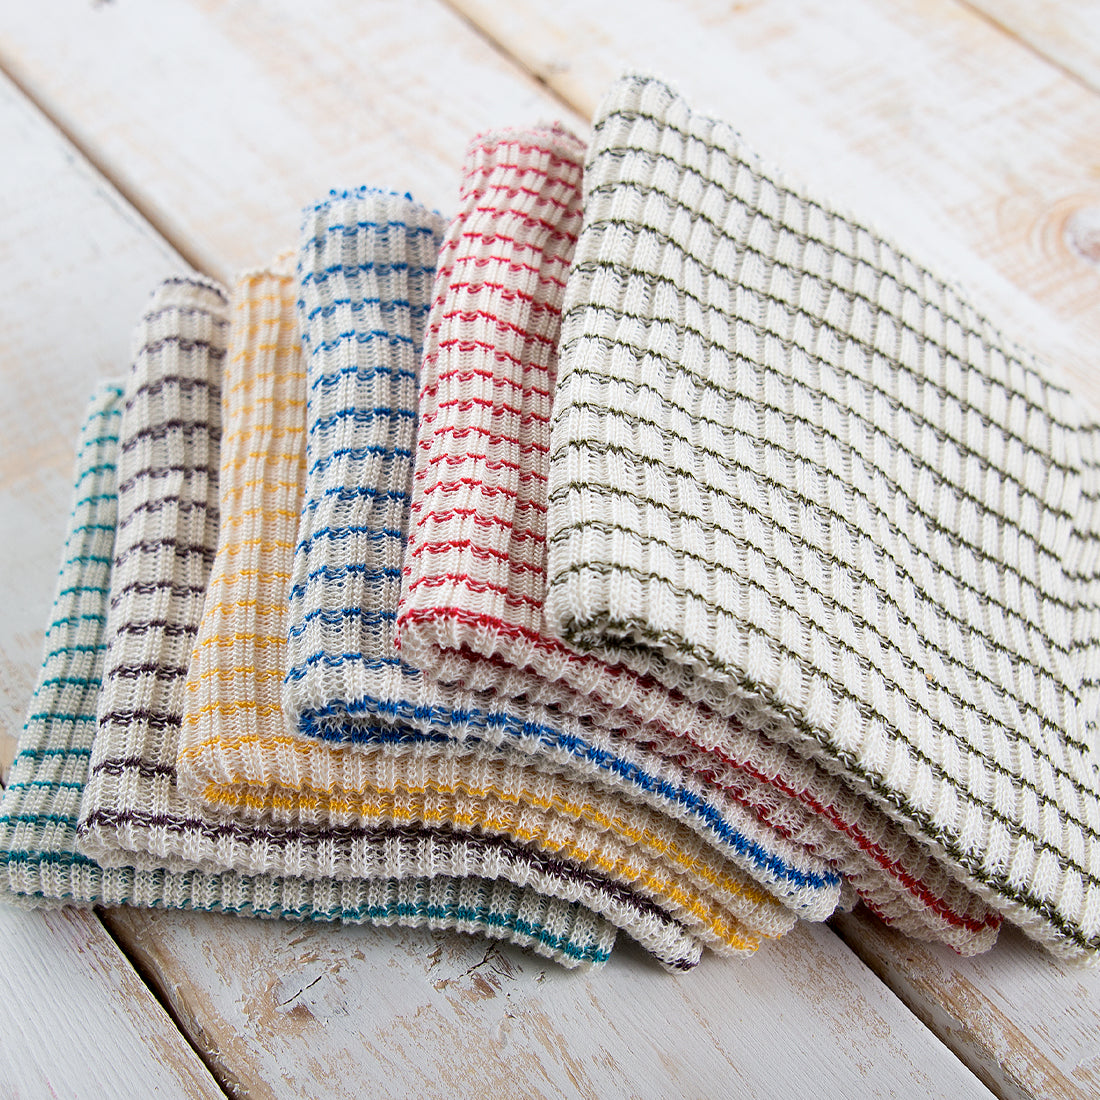 The Different Uses of a Dishcloth or a Dish Towels